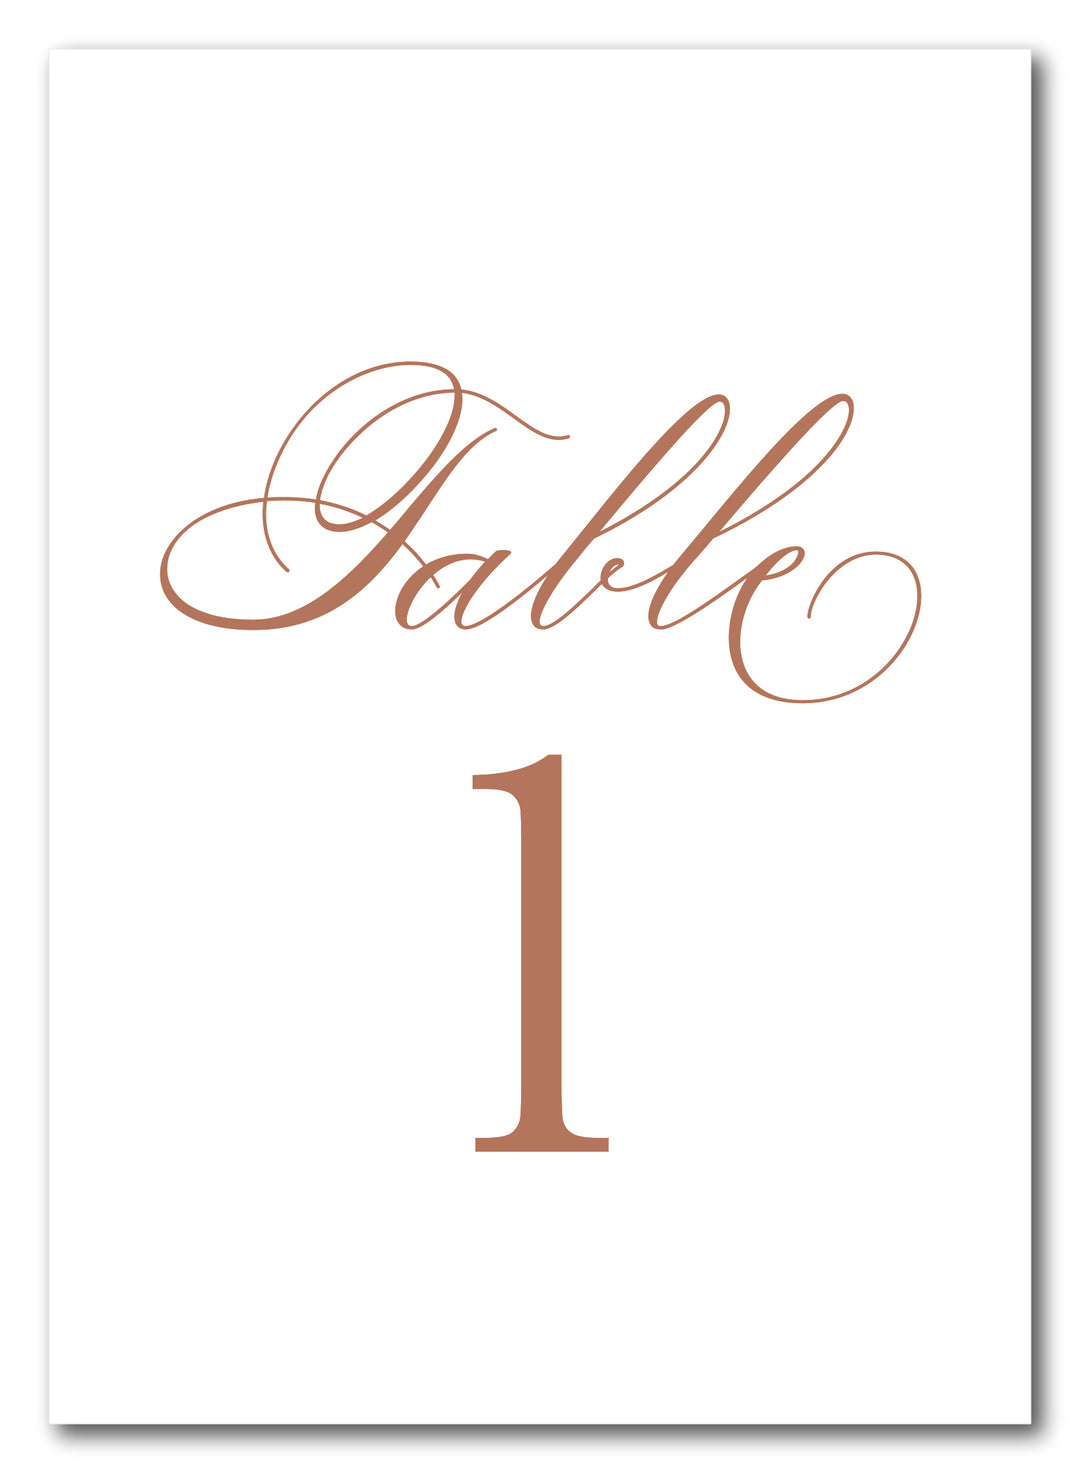 The Leah Table Number